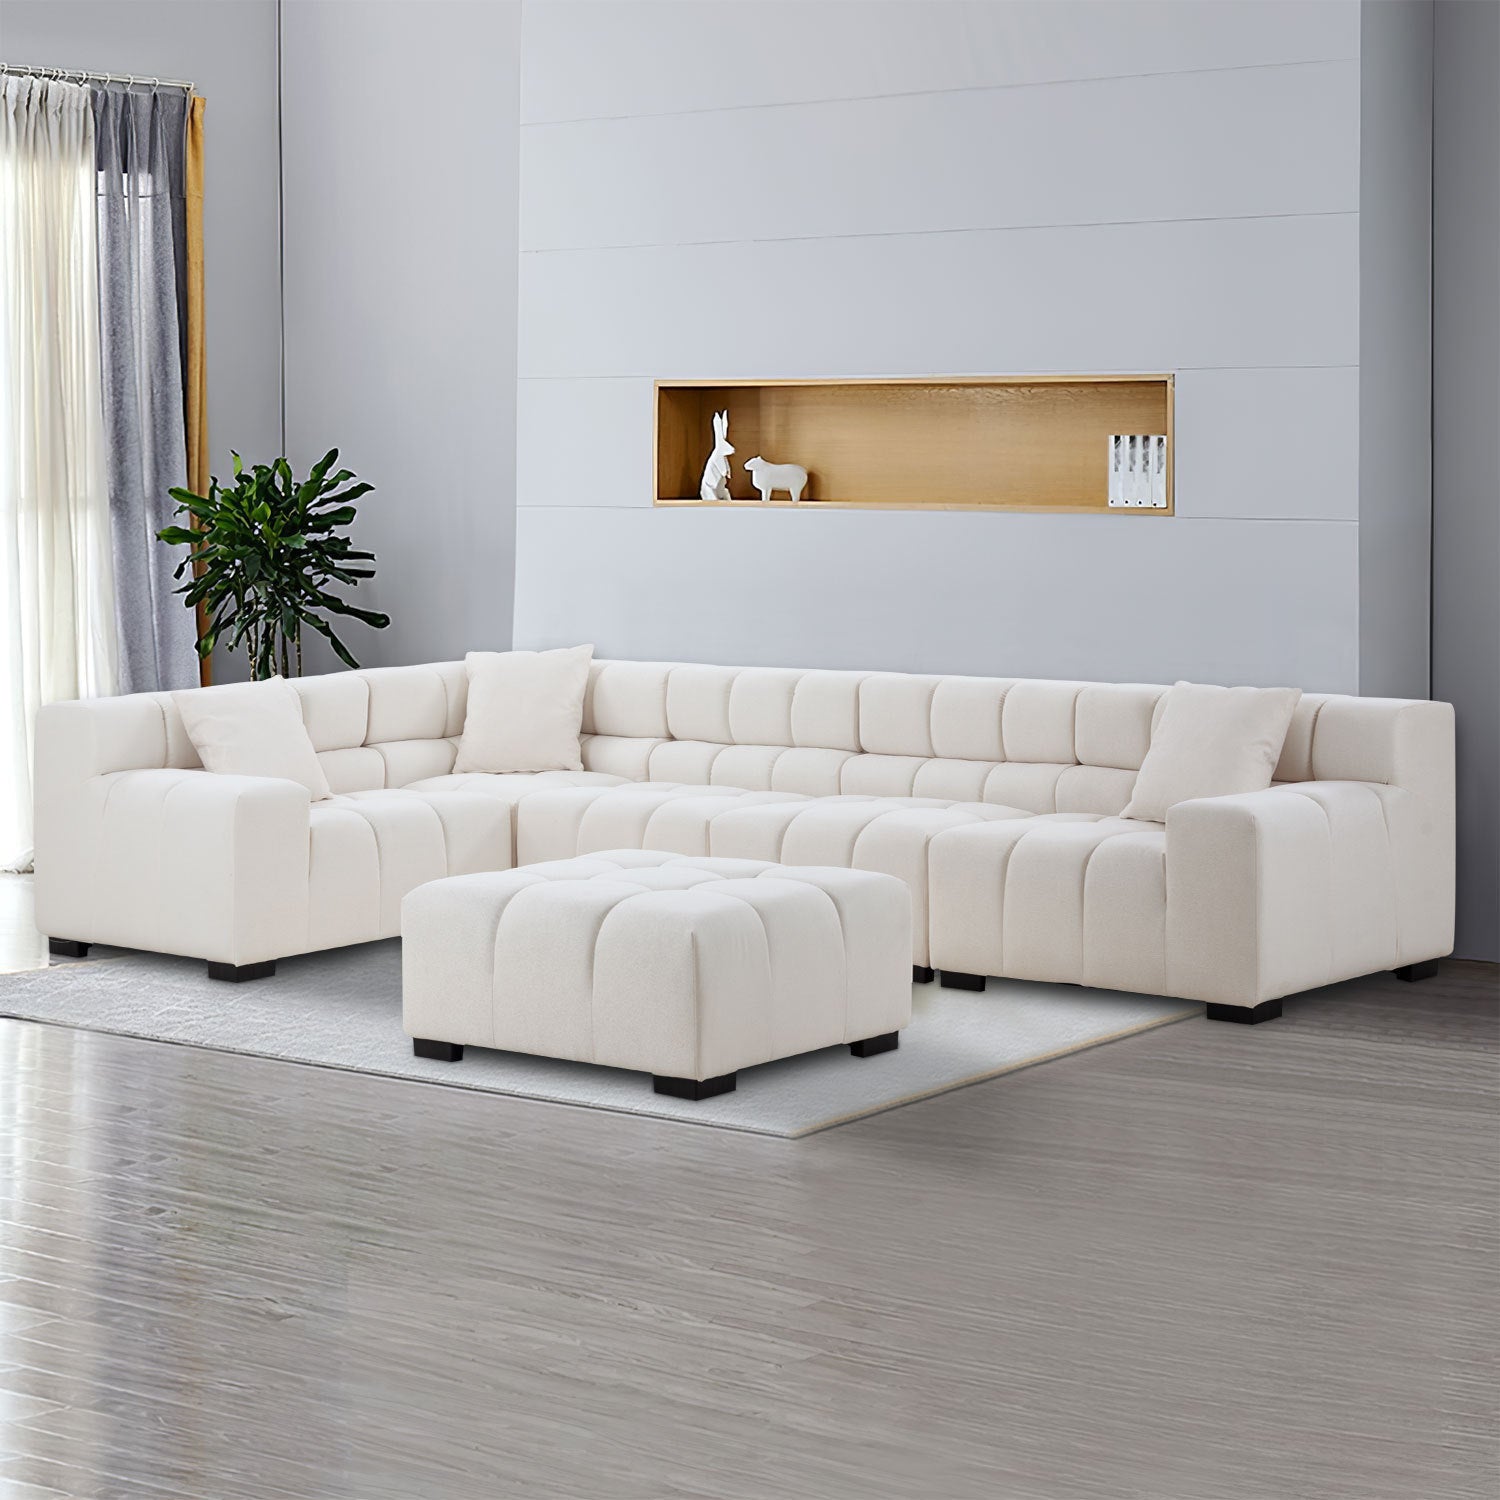 Modular Seating Sofa Couch with Ottoman - Beige